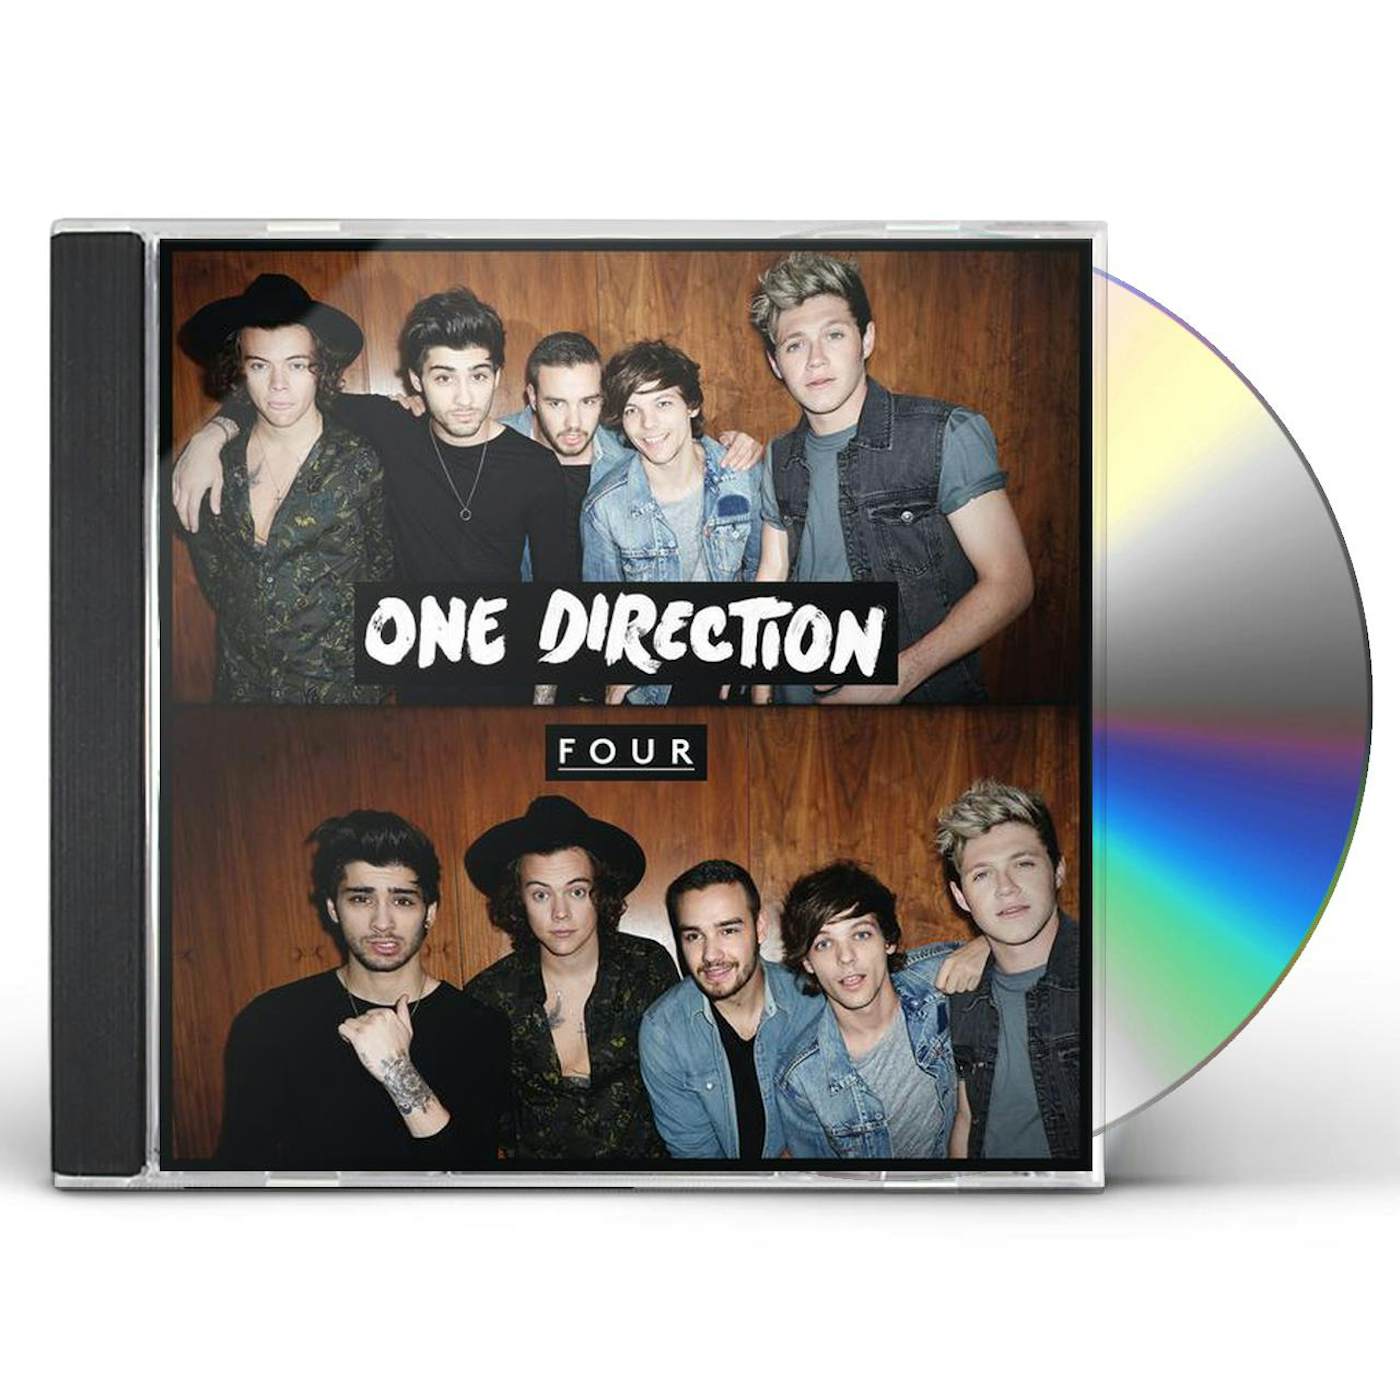 One Direction FOUR CD